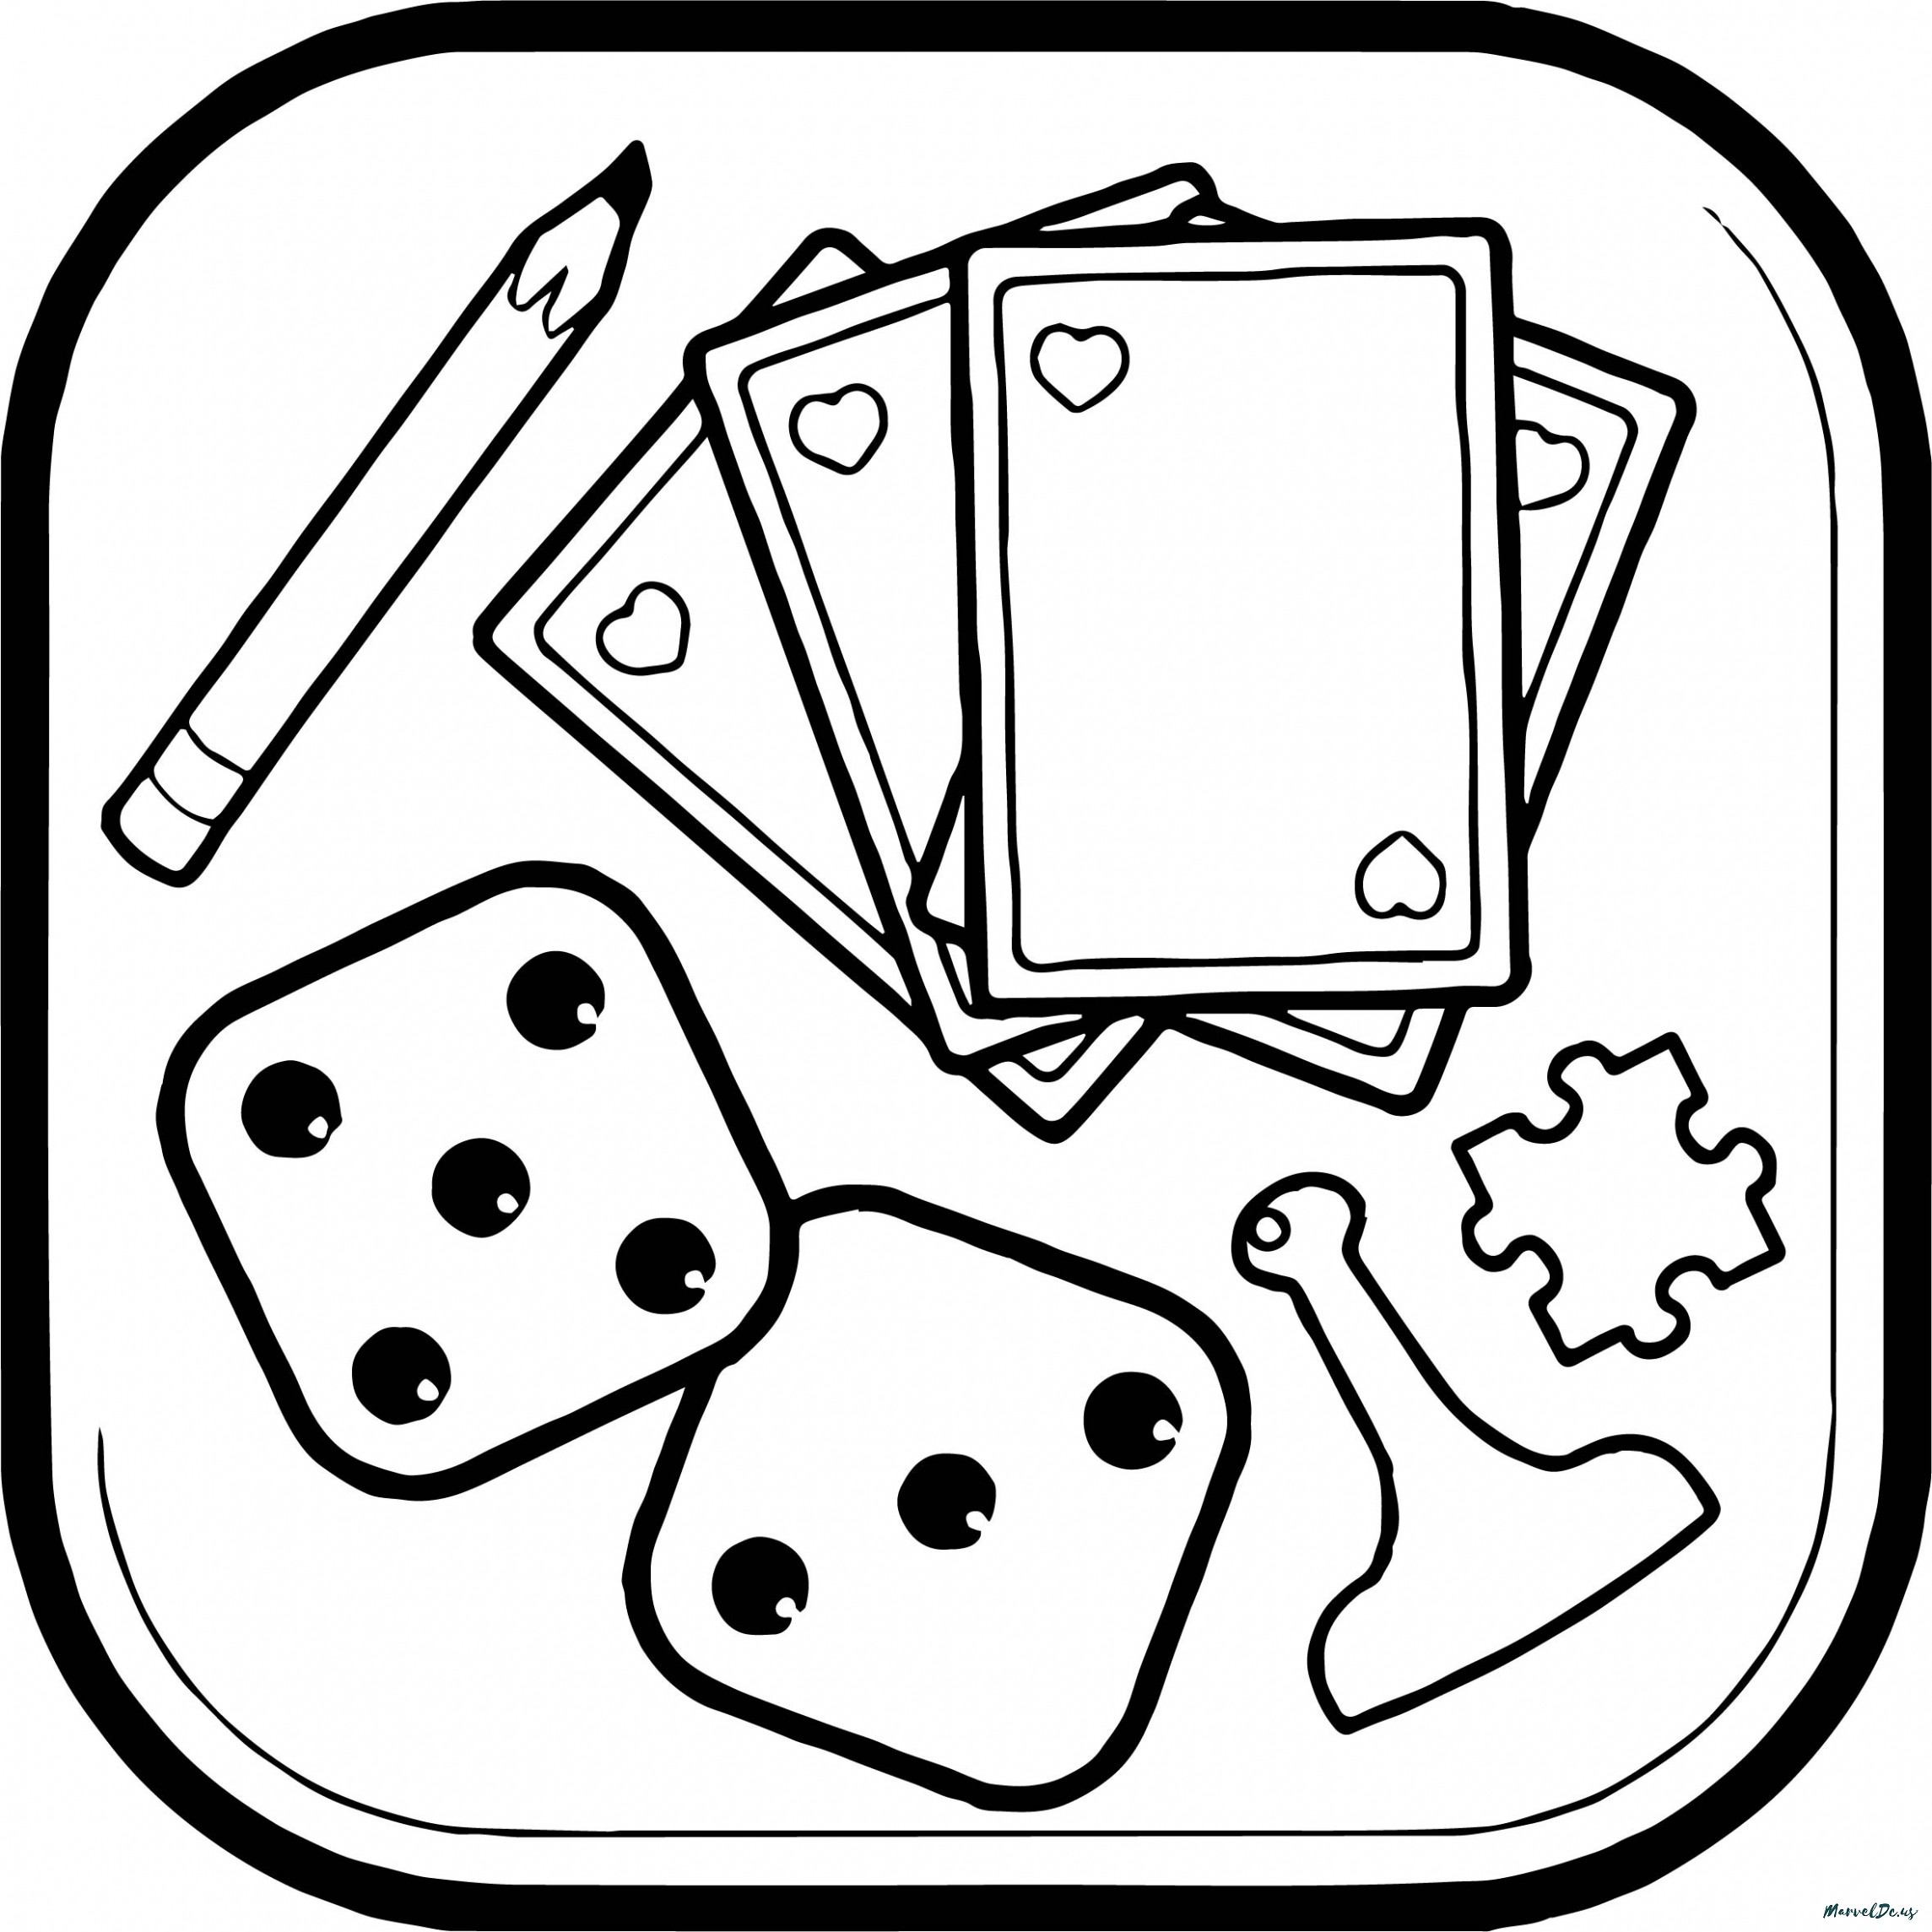 Board Game Coloring Pages at GetColorings.com | Free printable